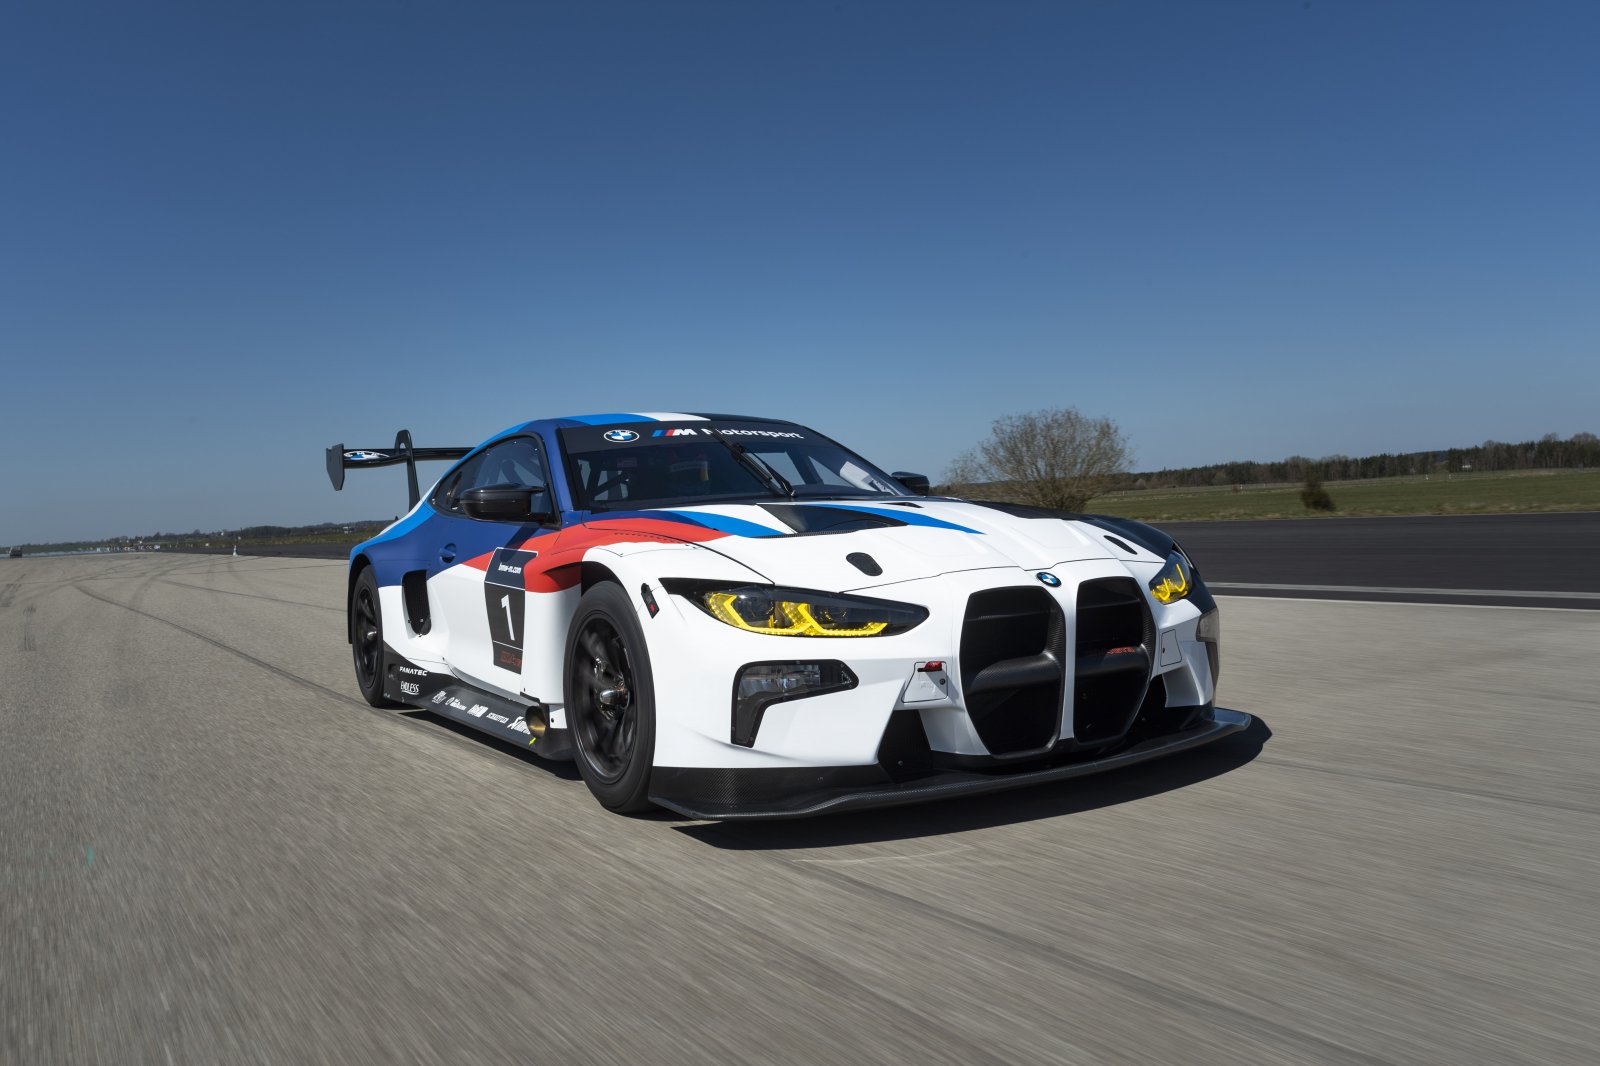 BMW to run new M4 GT3 at TotalEnergies 24 Hours of Spa test days